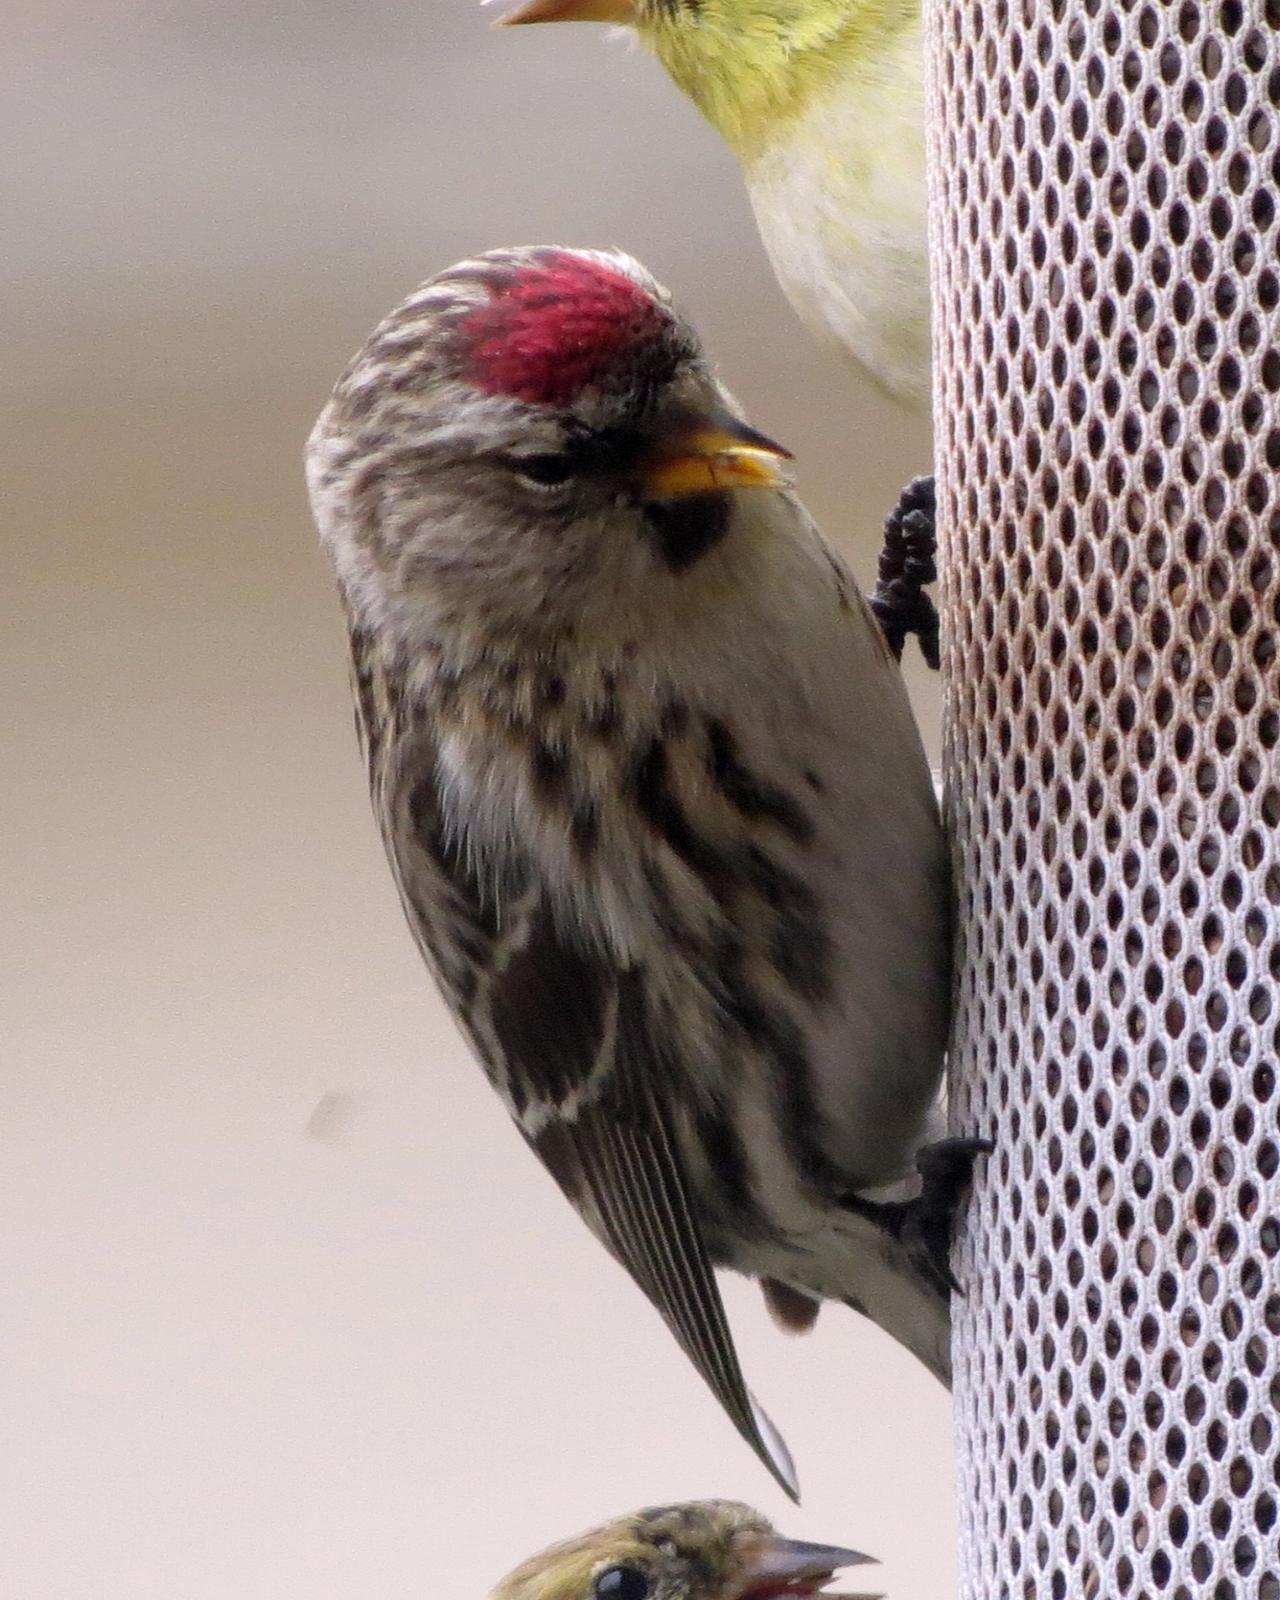 Common Redpoll Photo by Anna E. Wittmer